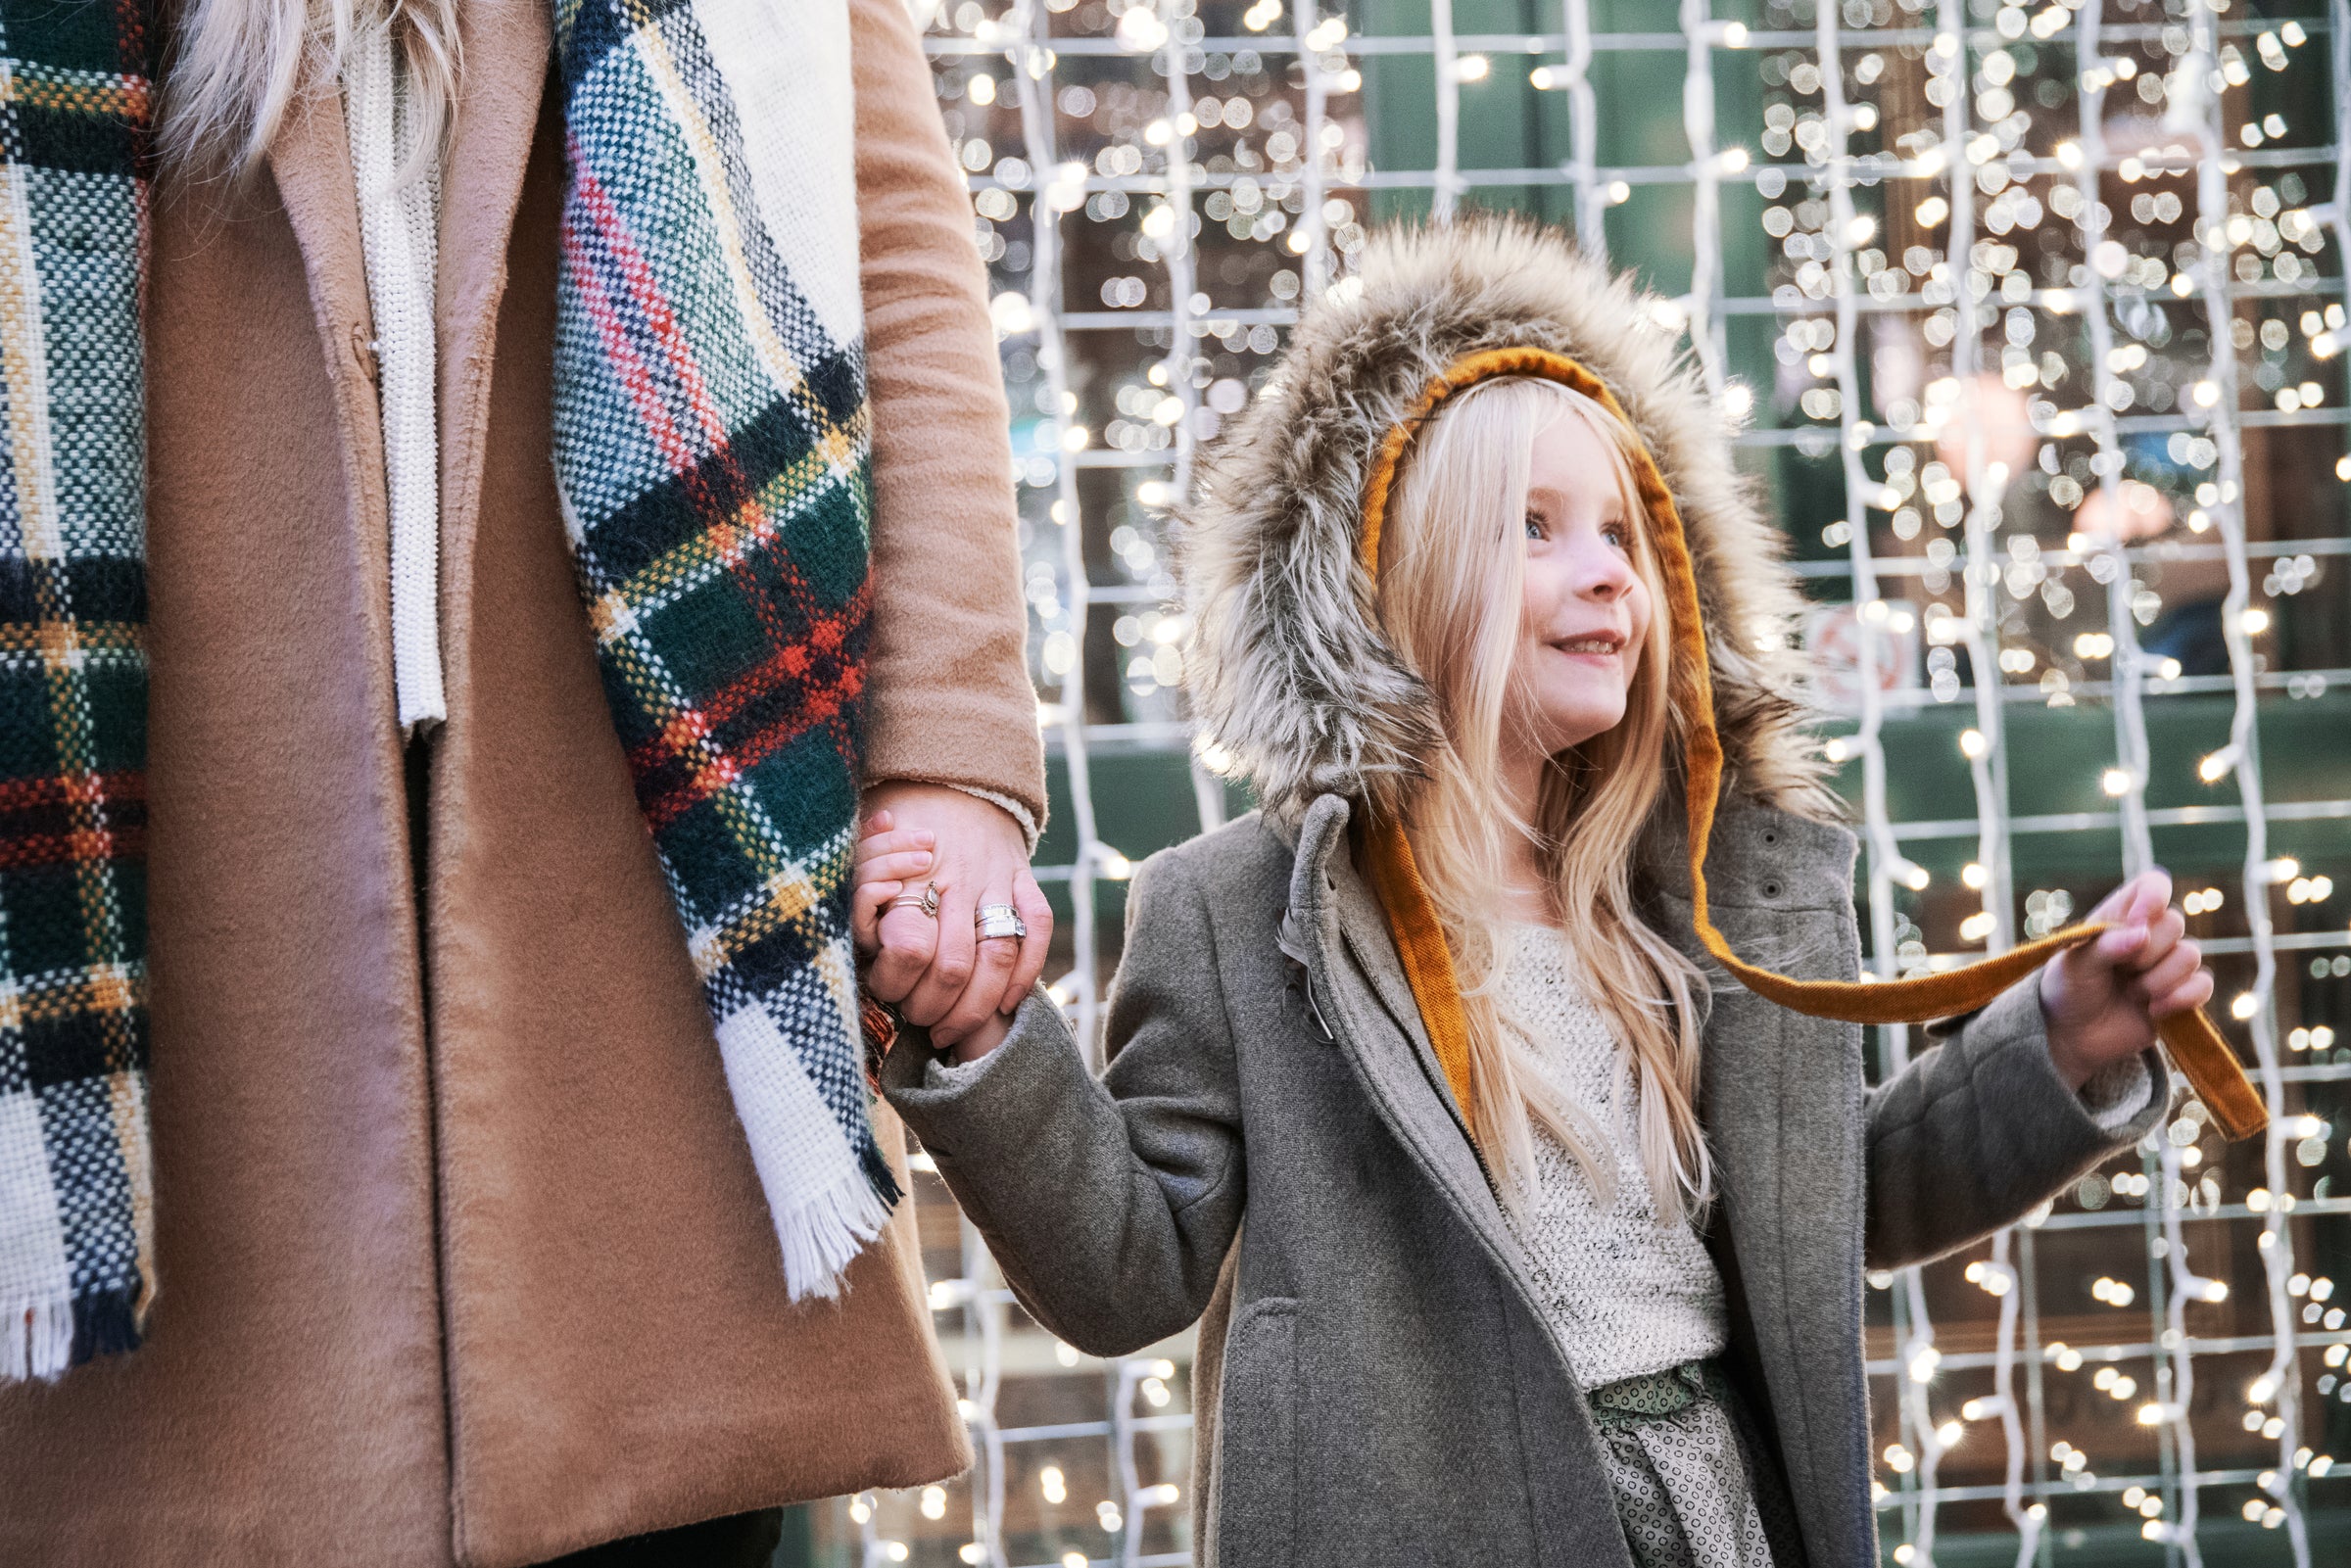 Child in grey coat with fur hood and yellow hat holding hands with adult in beige coat with plaid scarf in front of a wall of string lights